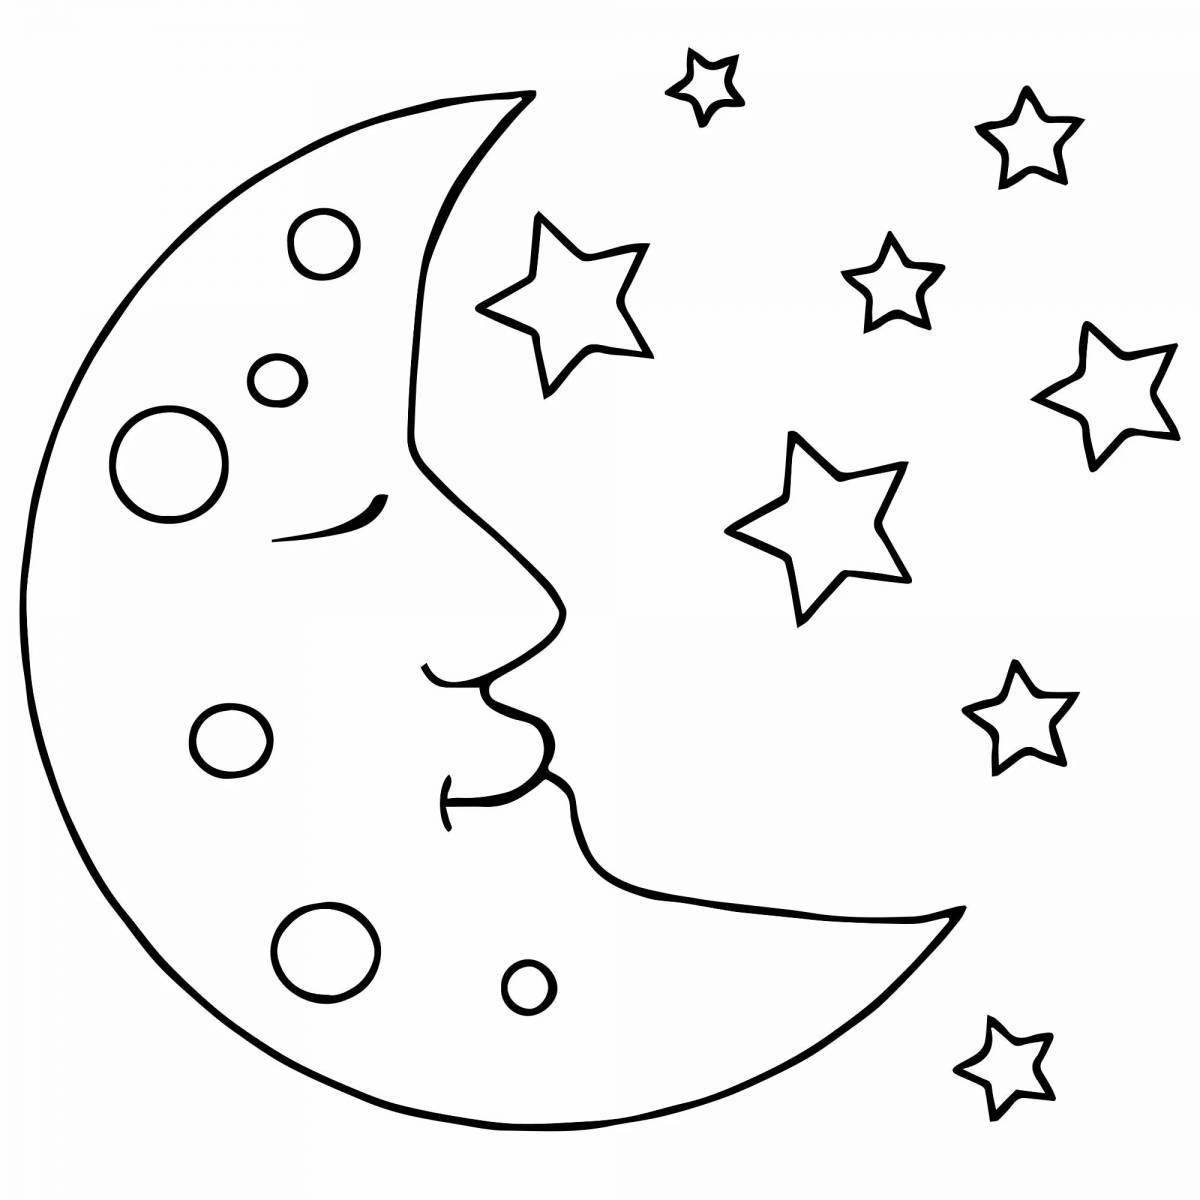 Bright coloring moon for kids